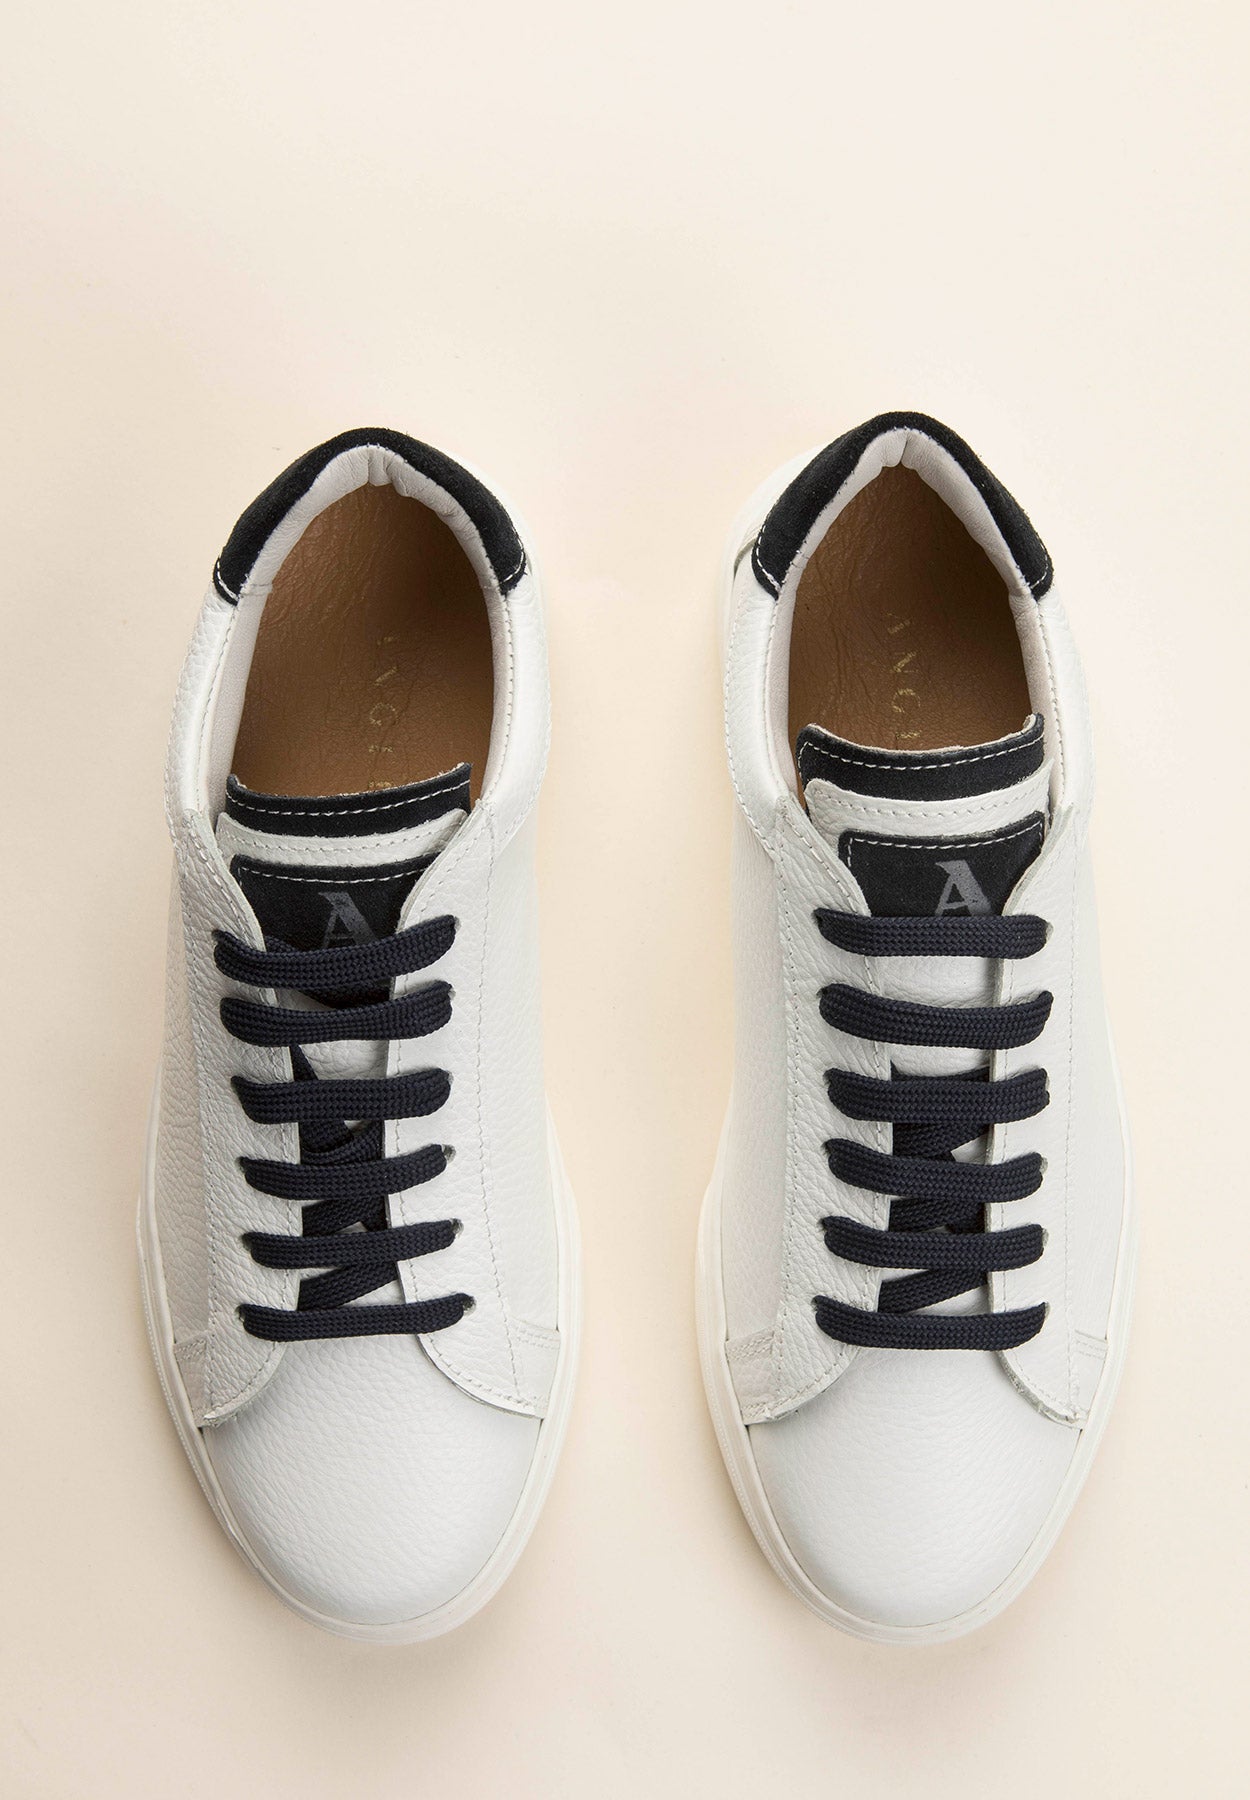 White leather sneakers with blue laces